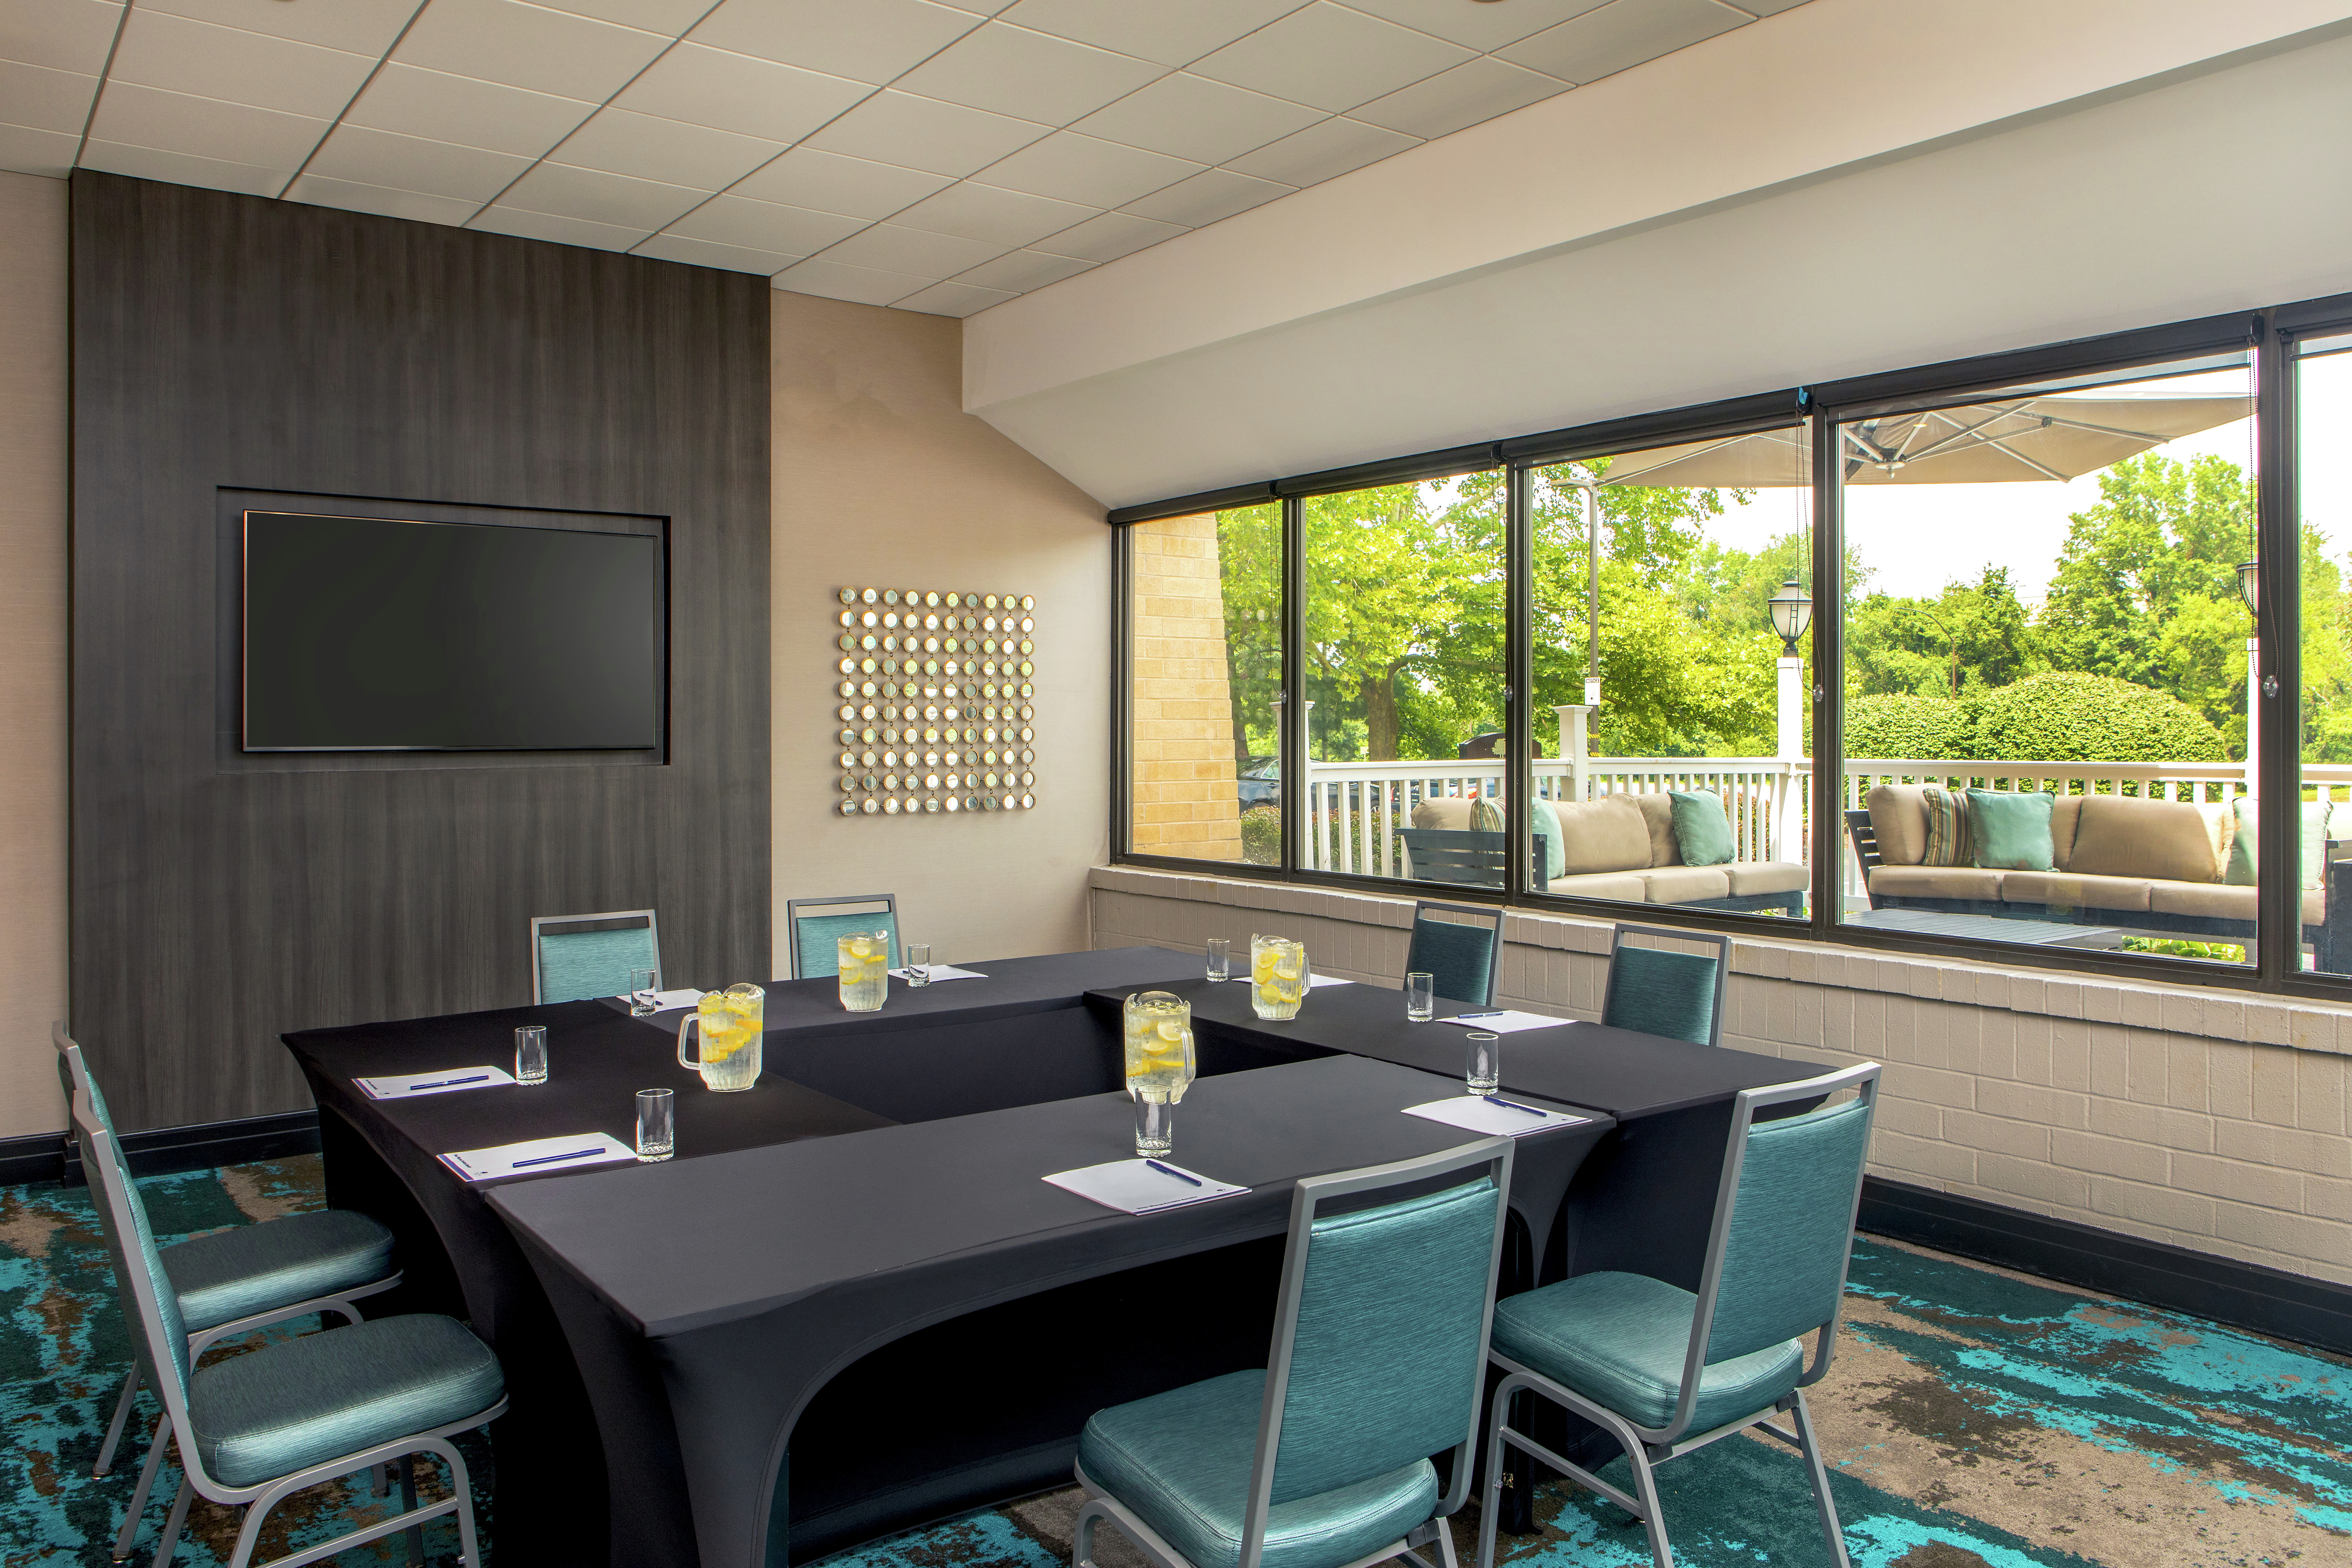 Our PDR Room with Adjoining Patio and Additional Outdoor Seating is Just Minutes from Baltimore's Inner Harbor